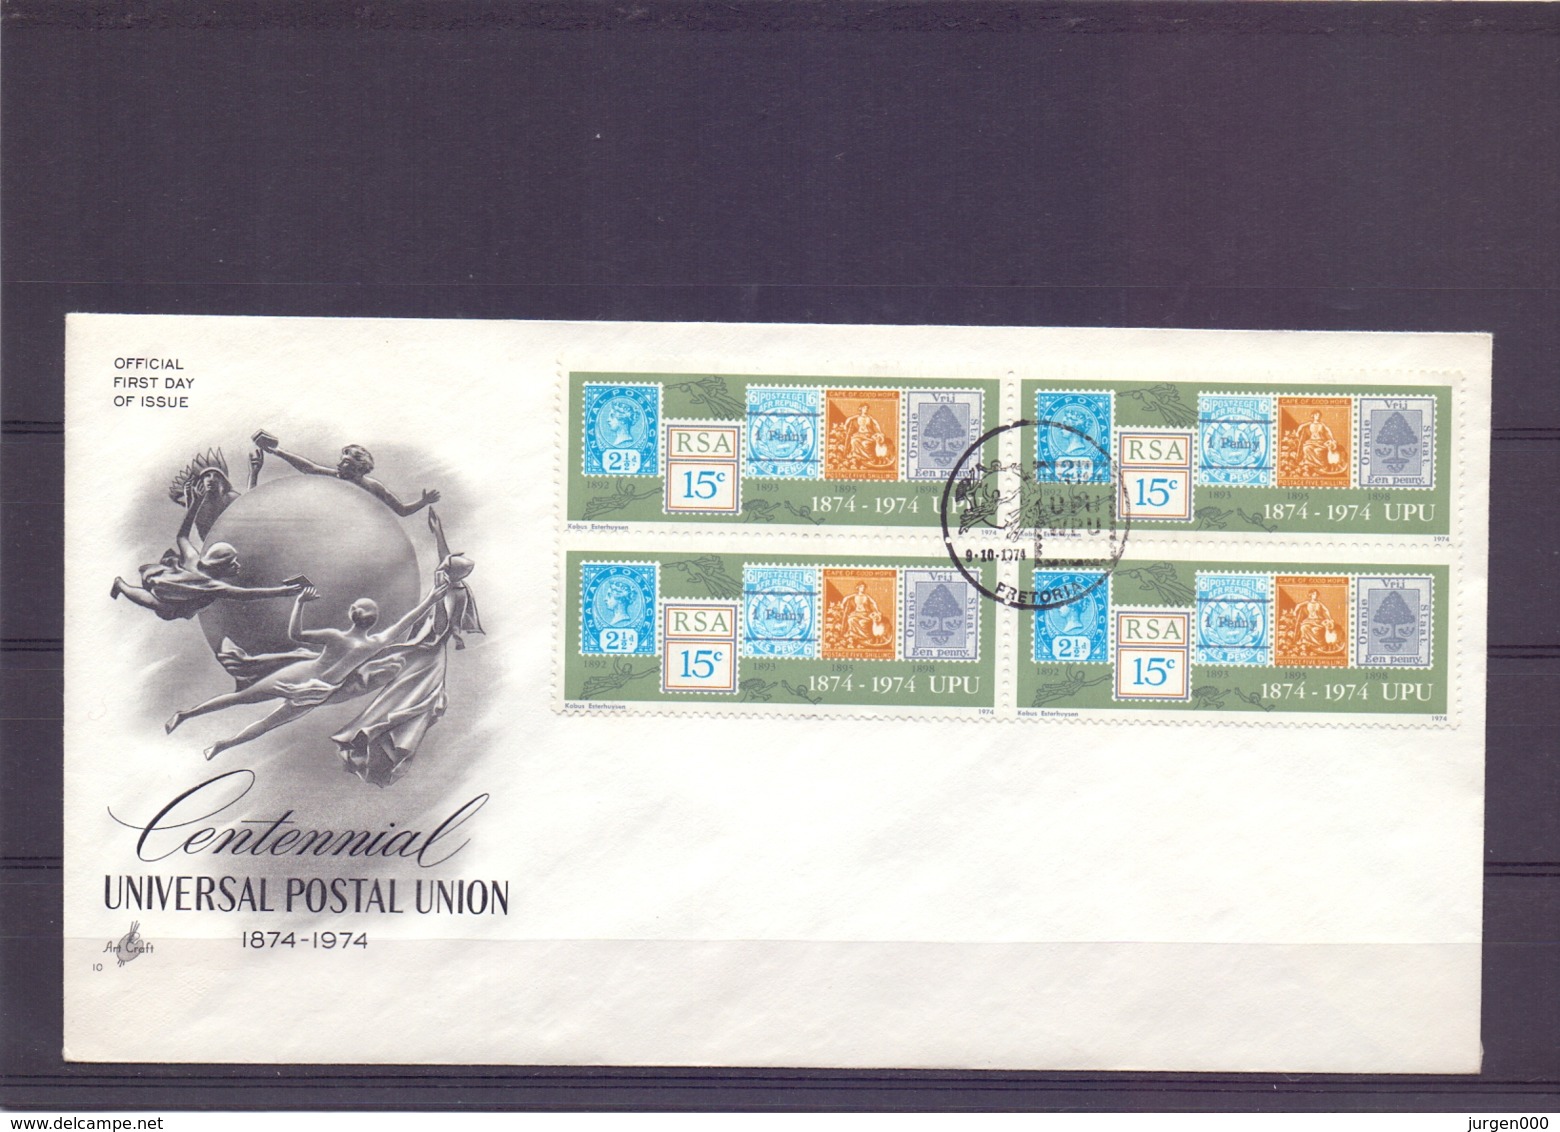 RSA - Centennial Postal Union -  FDC     (RM14297) - Stamps On Stamps